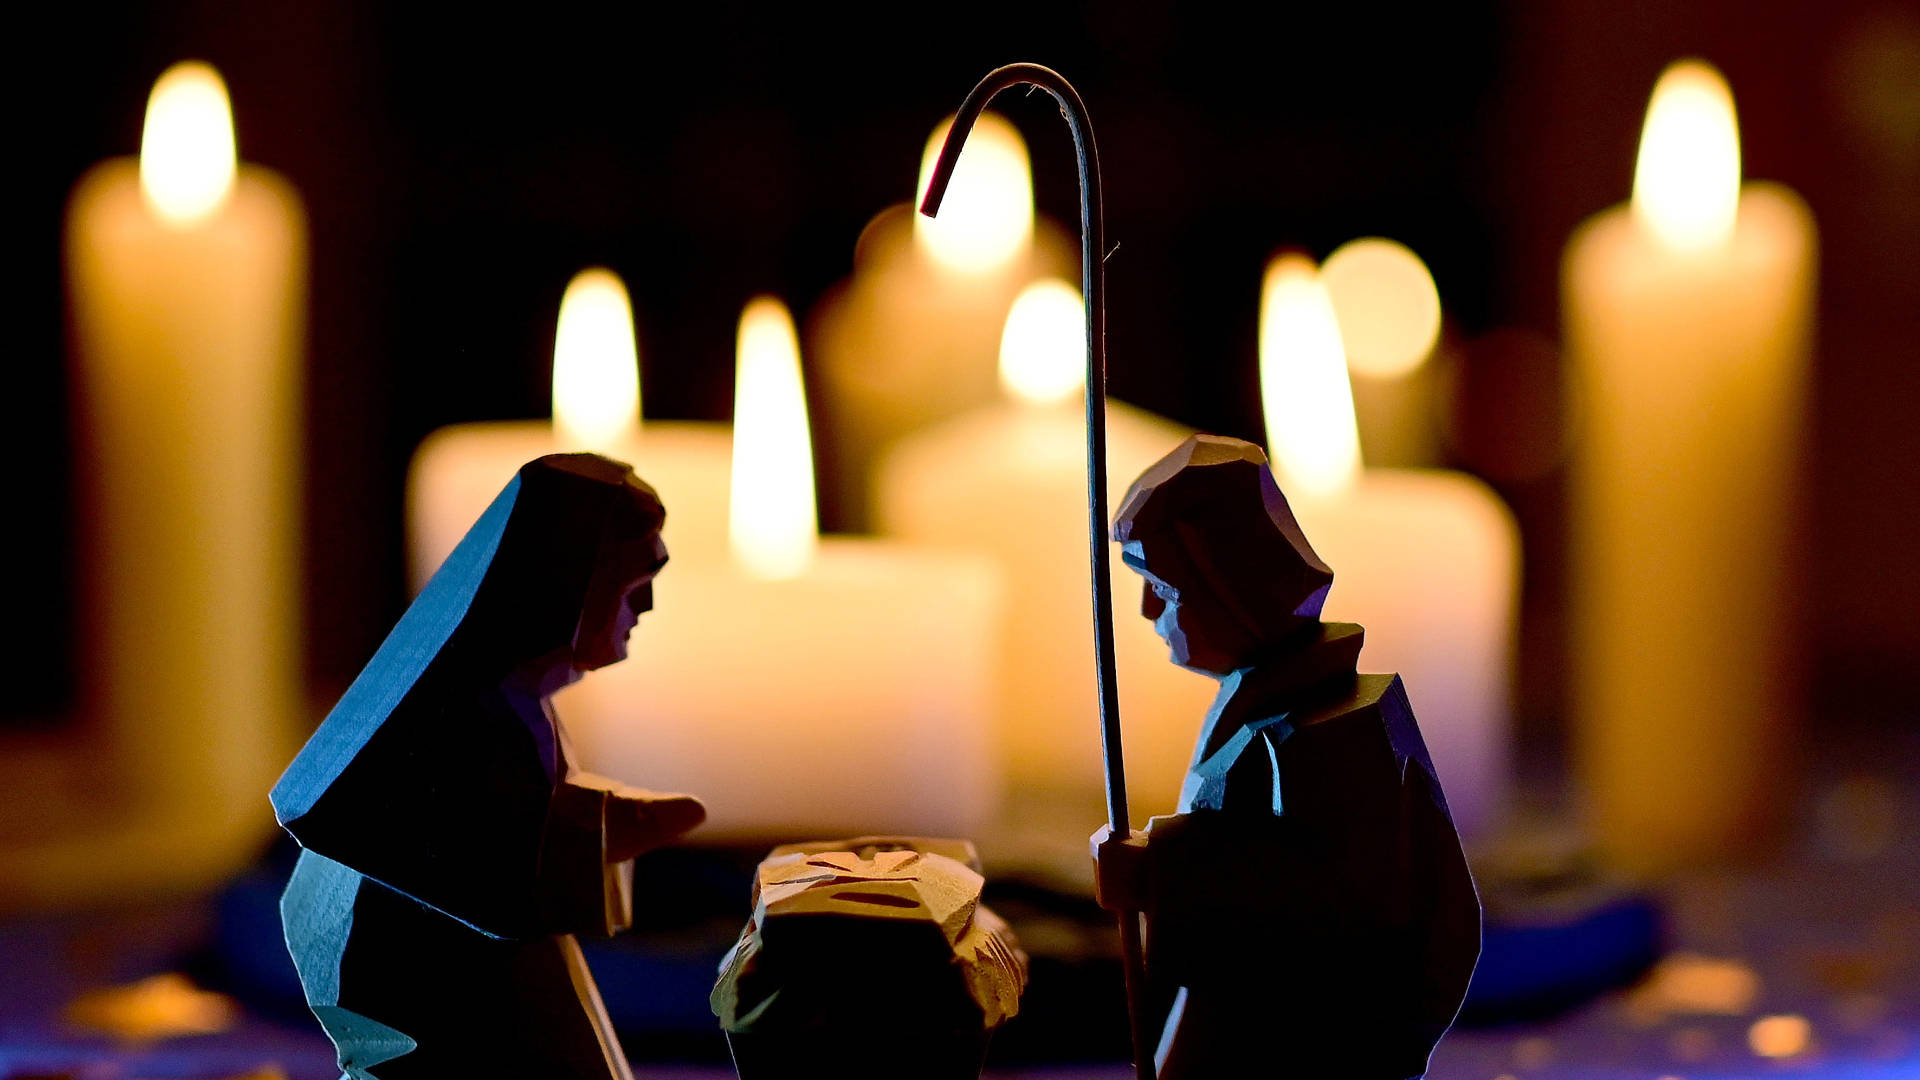 Holy Family And Candles